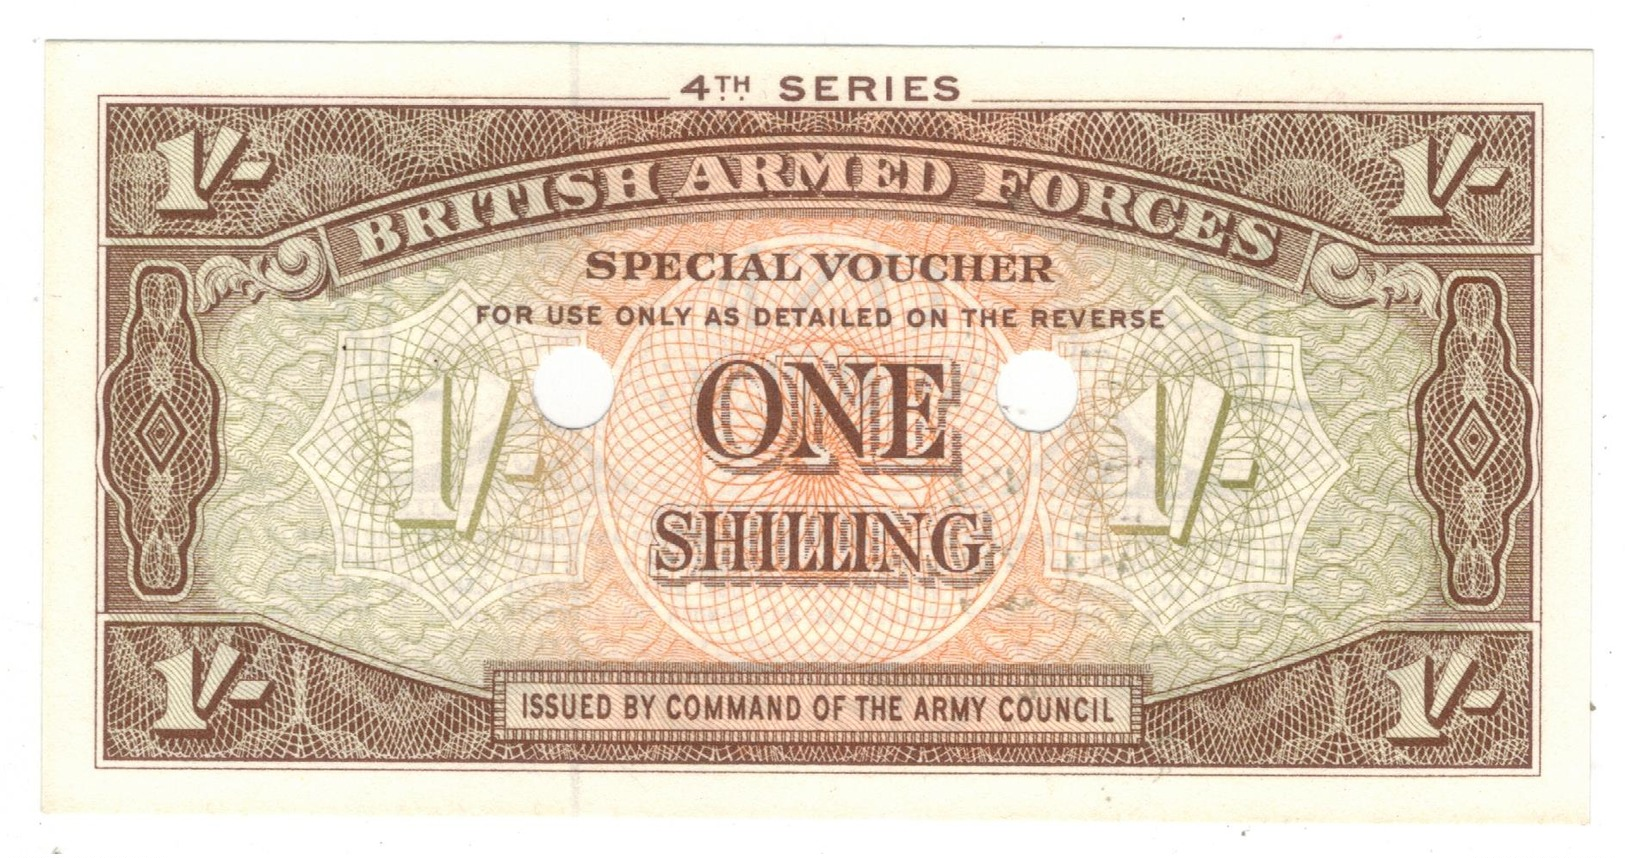 British Armed Forces , 1 Shilling. 4th Series. M32b (1962) UNC. - British Armed Forces & Special Vouchers